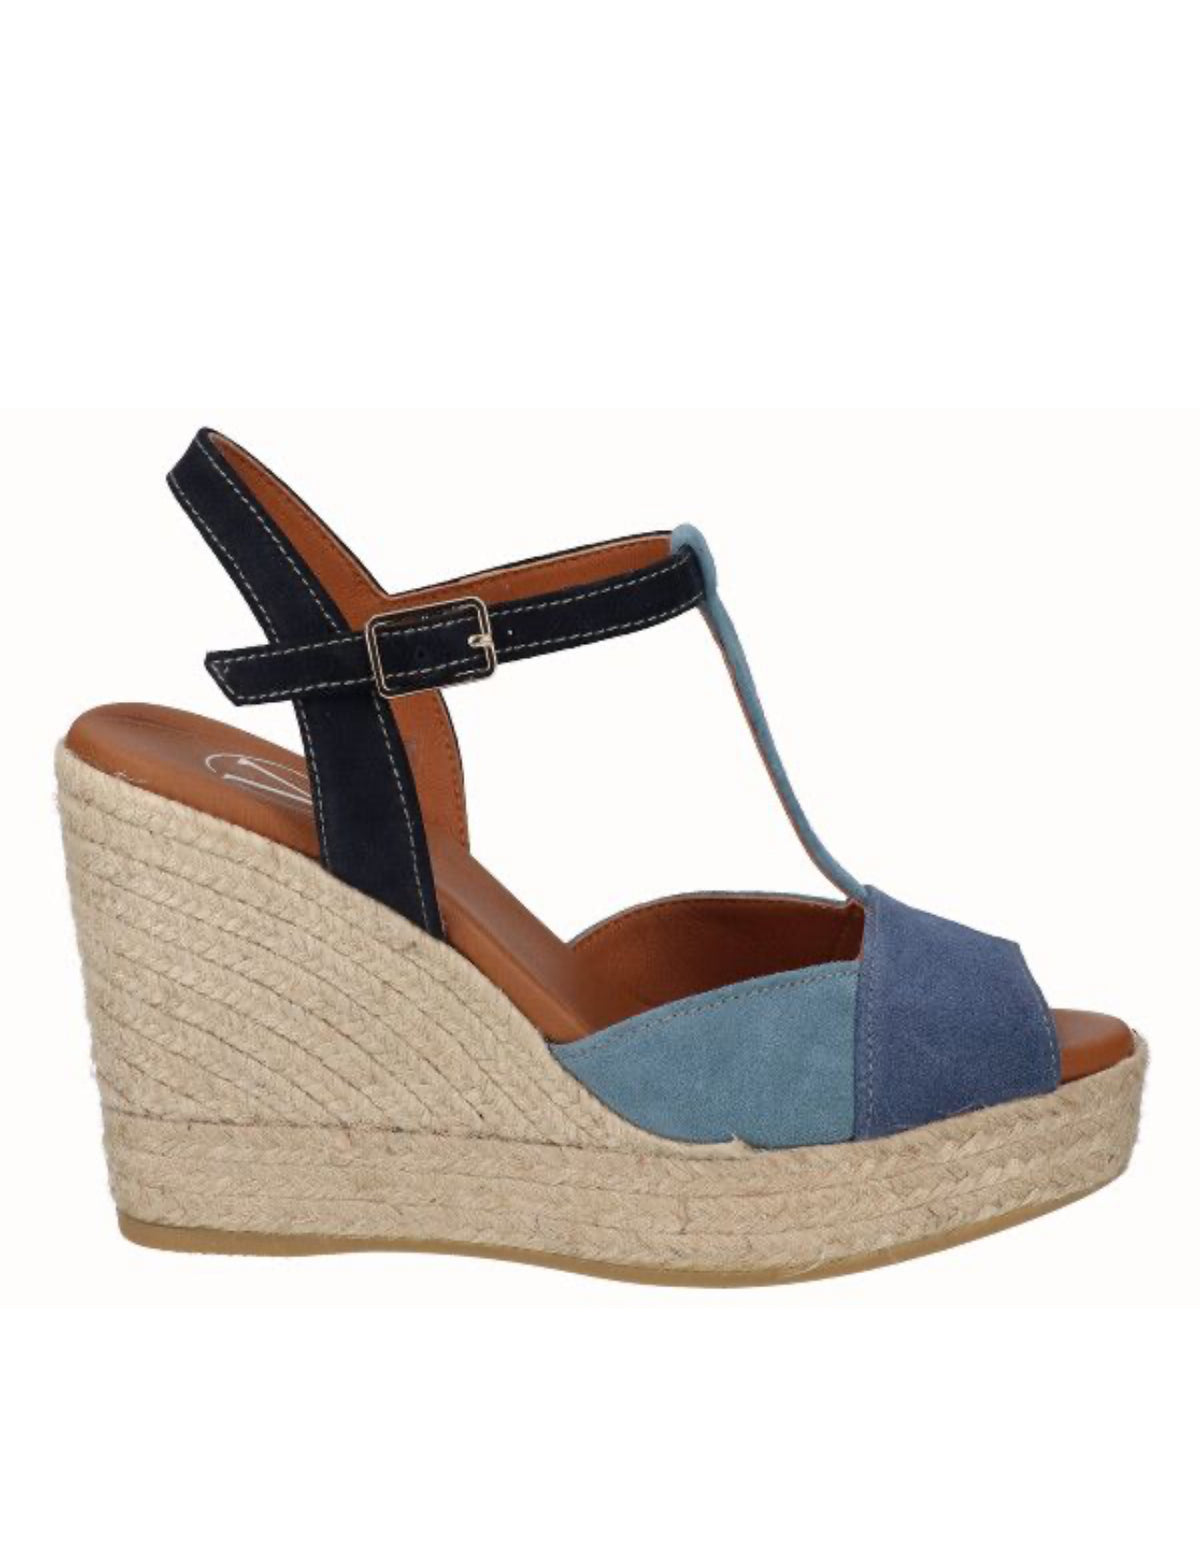 Viguera - 2150 Navy and Blue Wedge Sandal